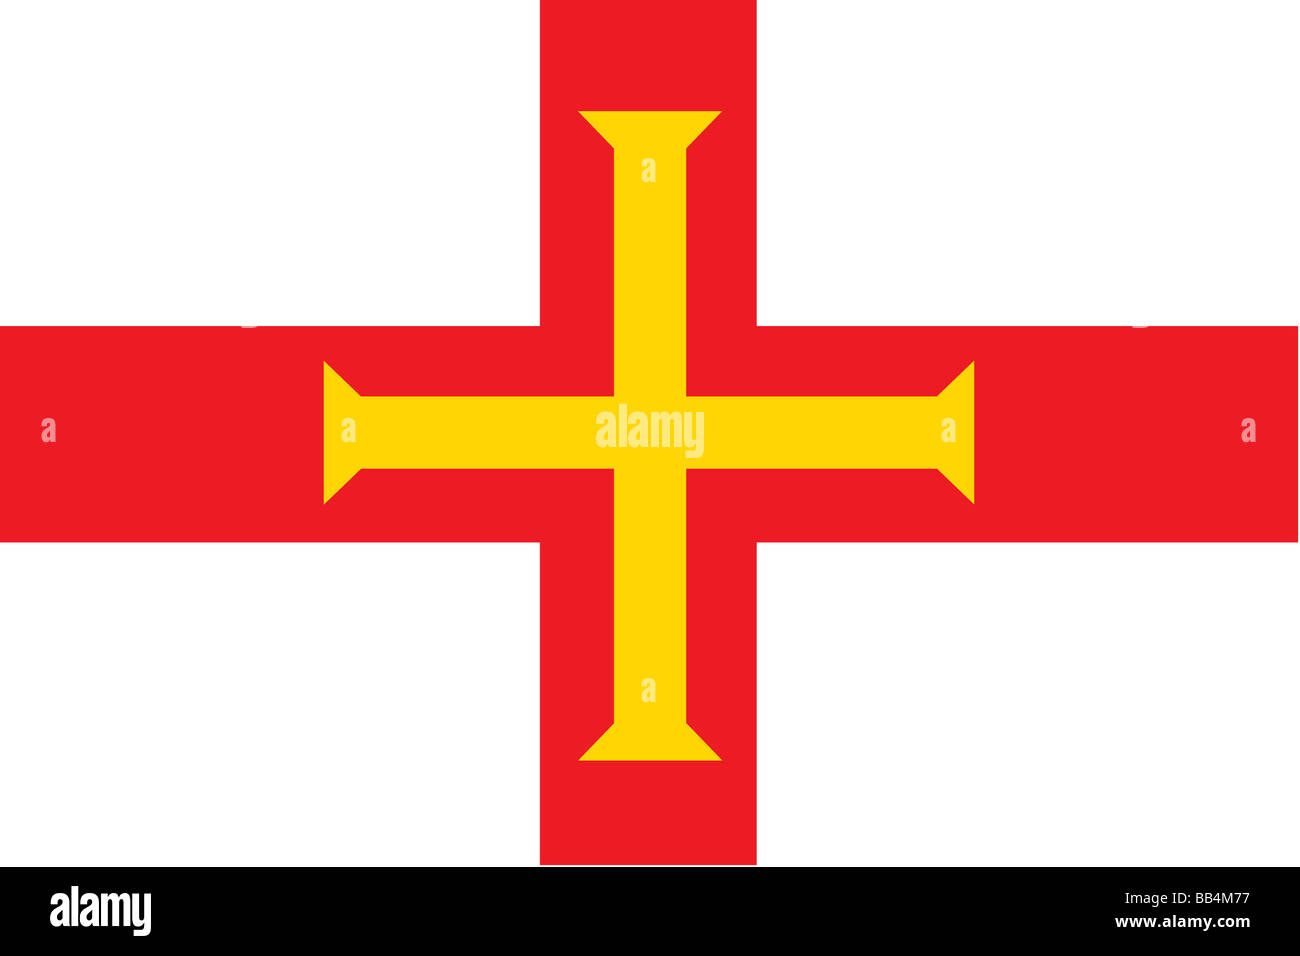 Flag of Guernsey, a crown dependency of the United Kingdom. Stock Photo